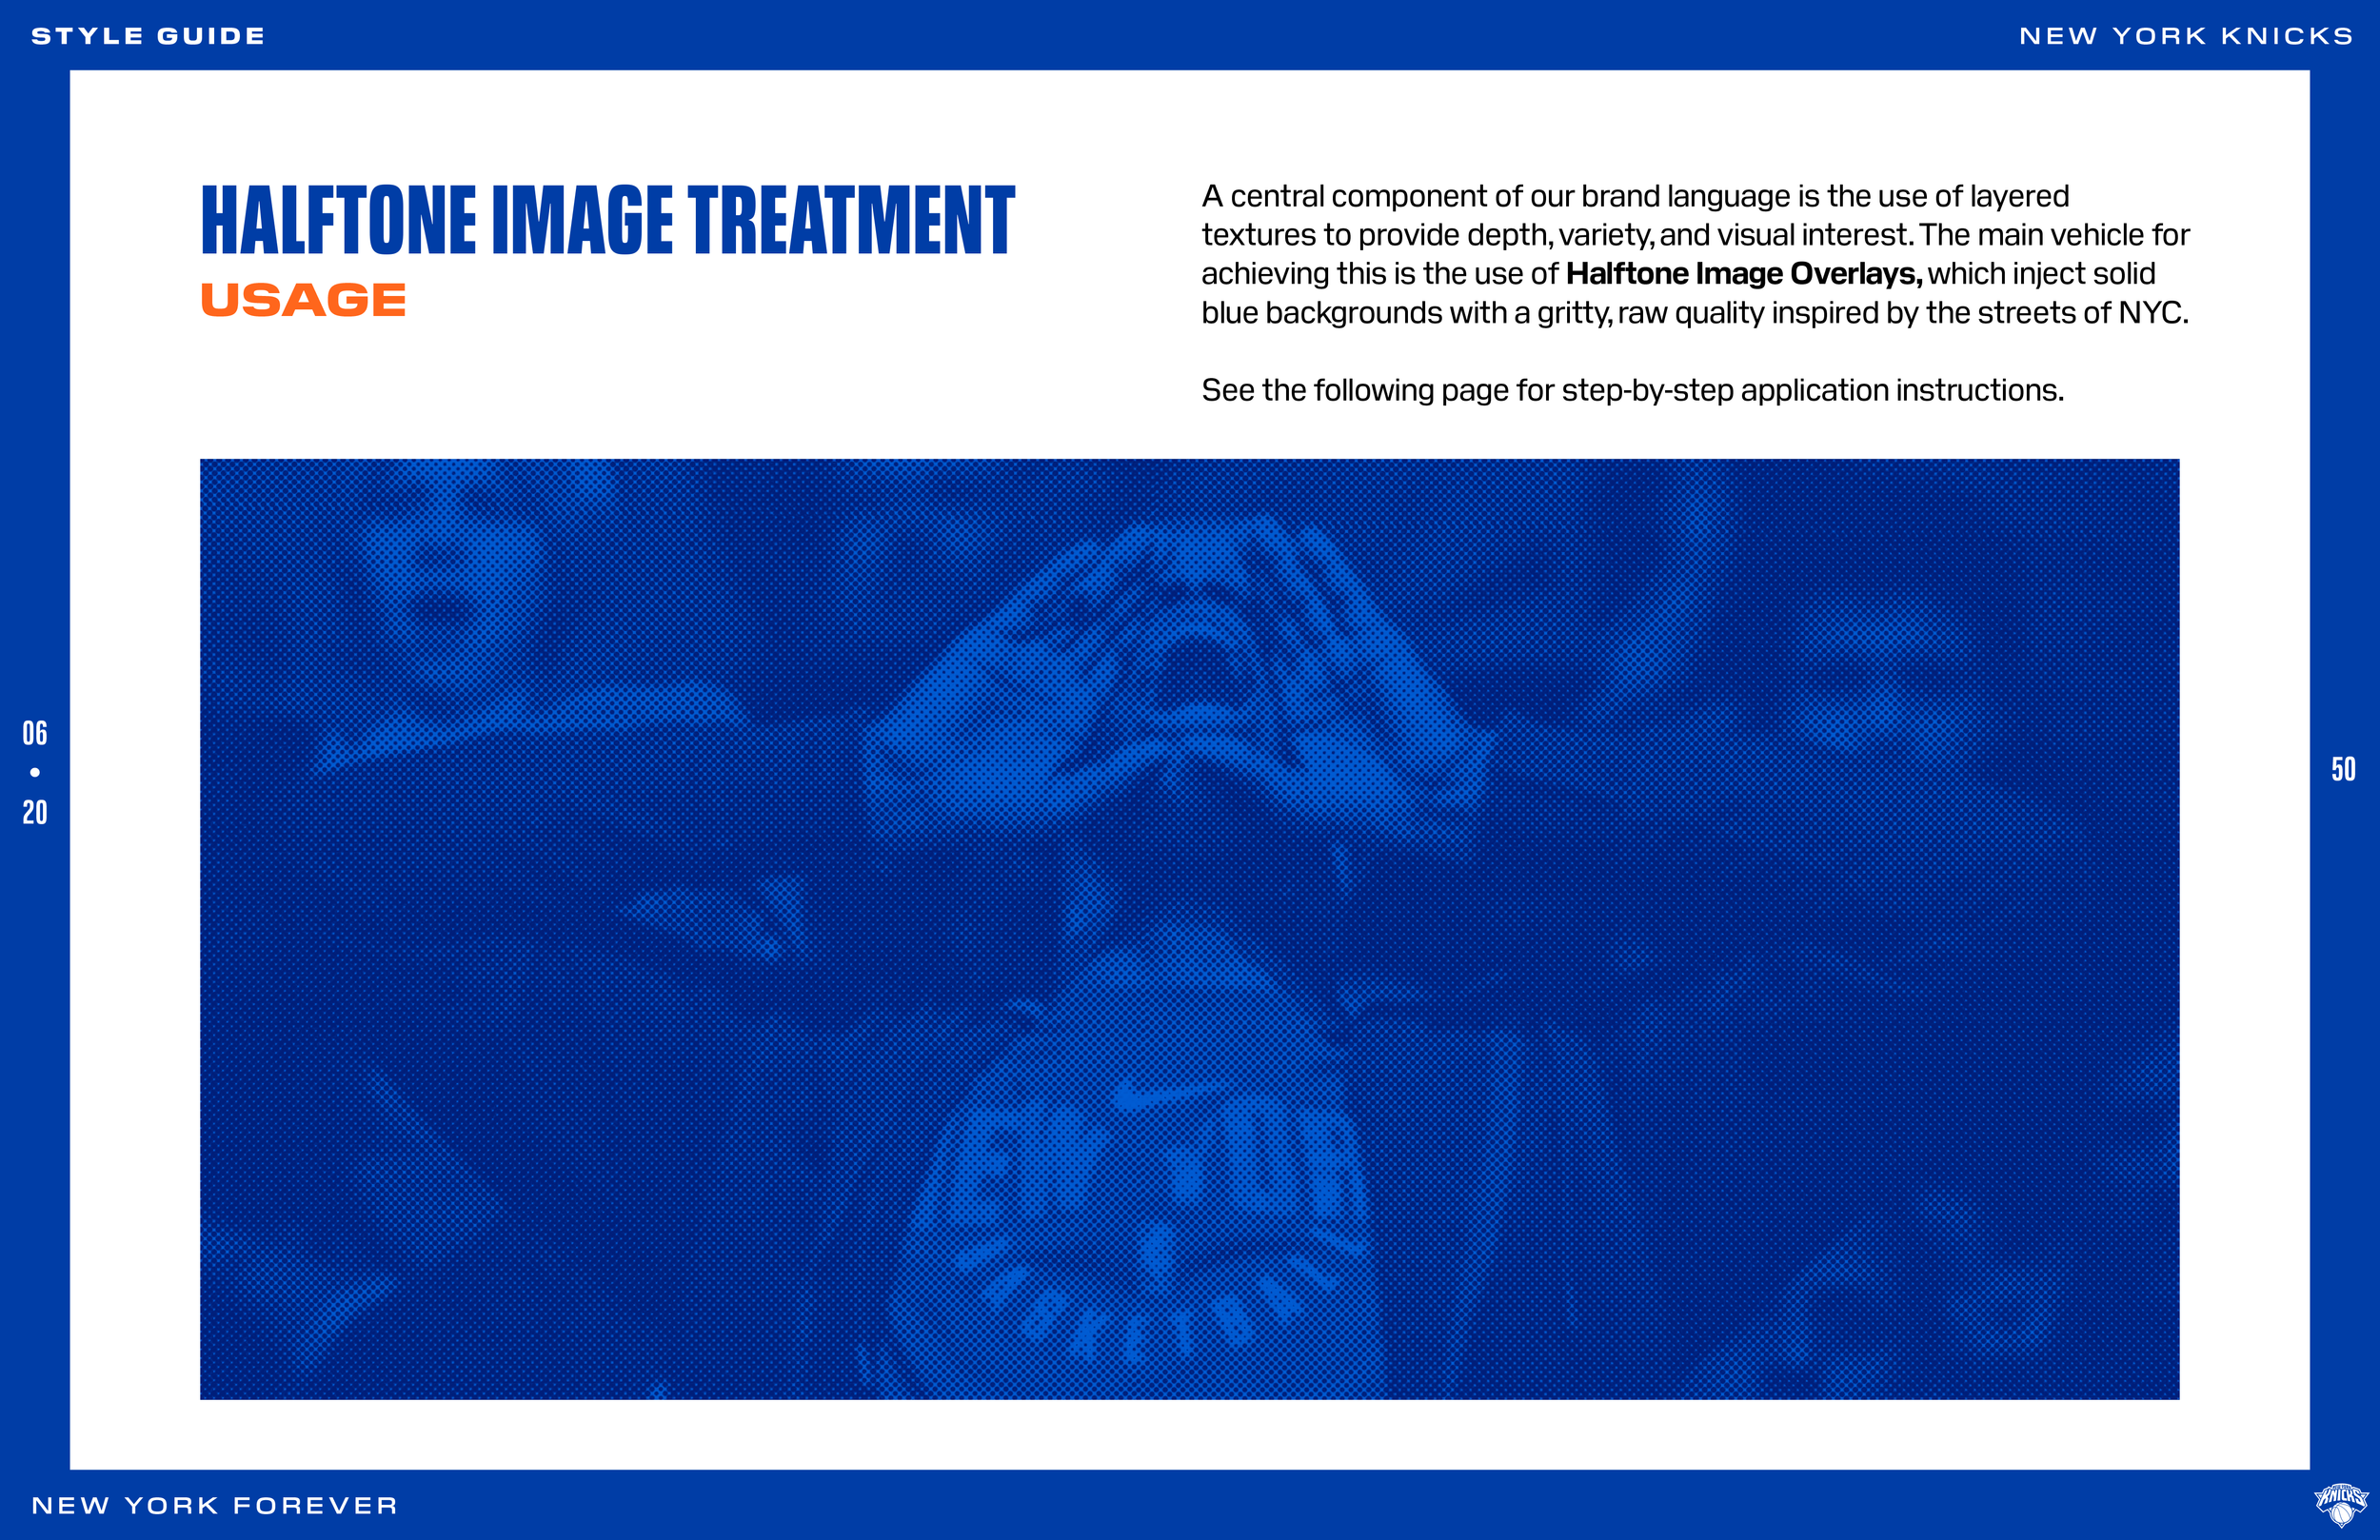 Pages from KNICKS_StyleGuide_062420 50.png